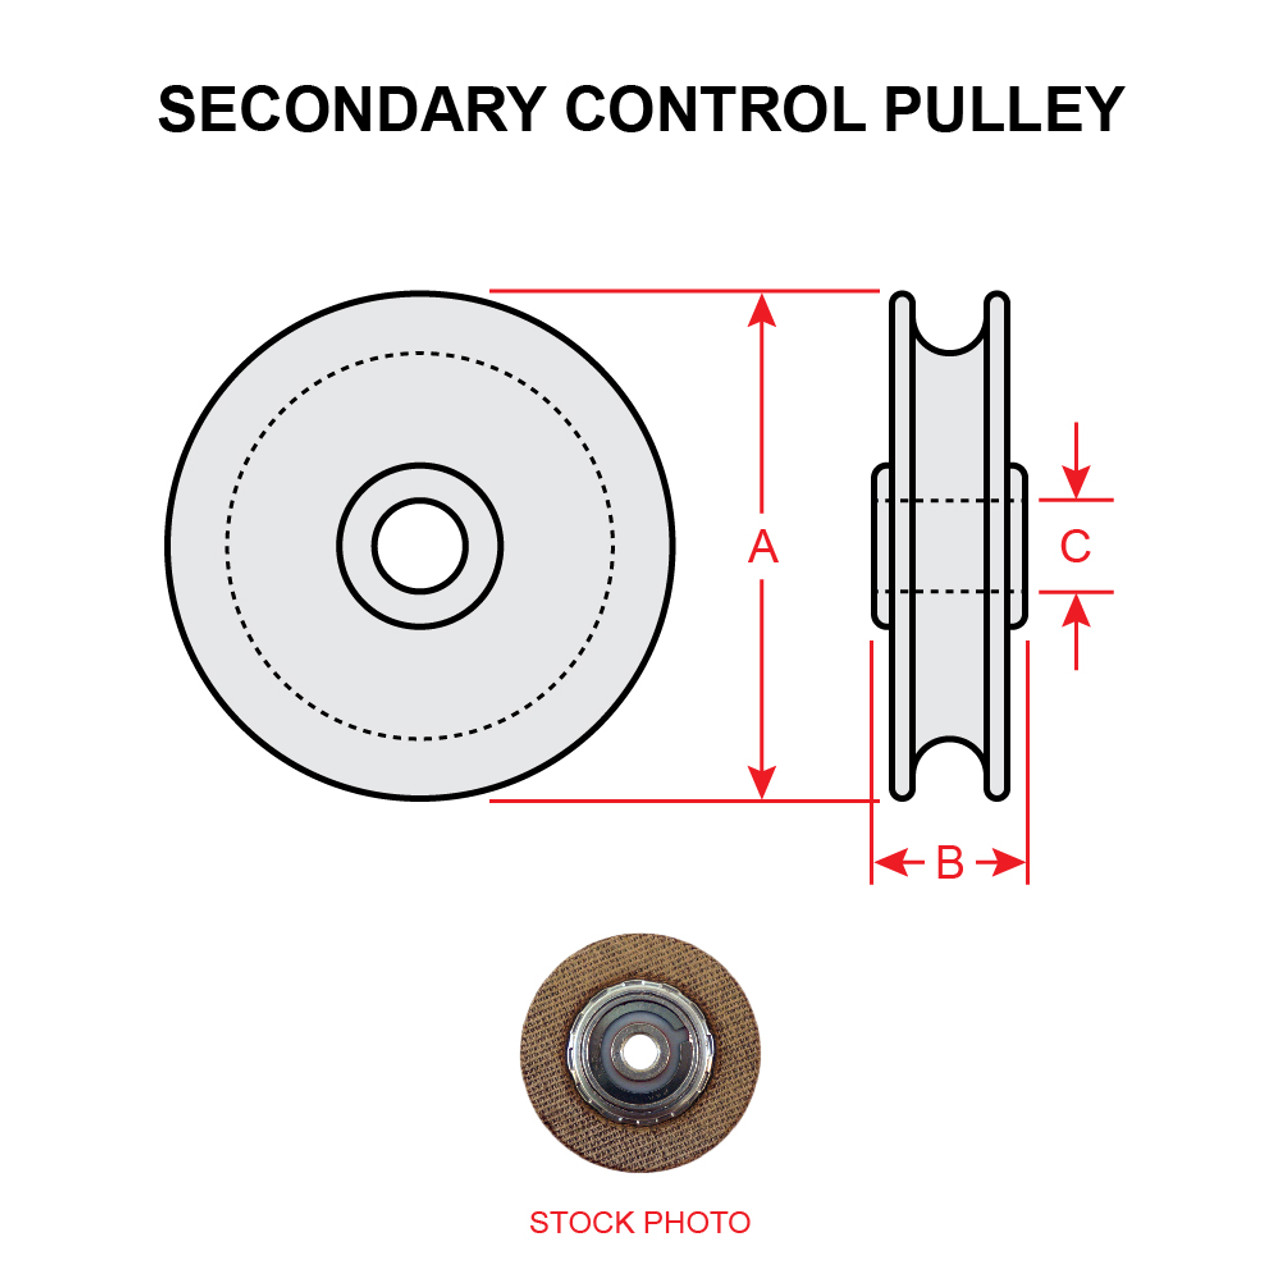 MS20219-4   SECONDARY CONTROL PULLEY